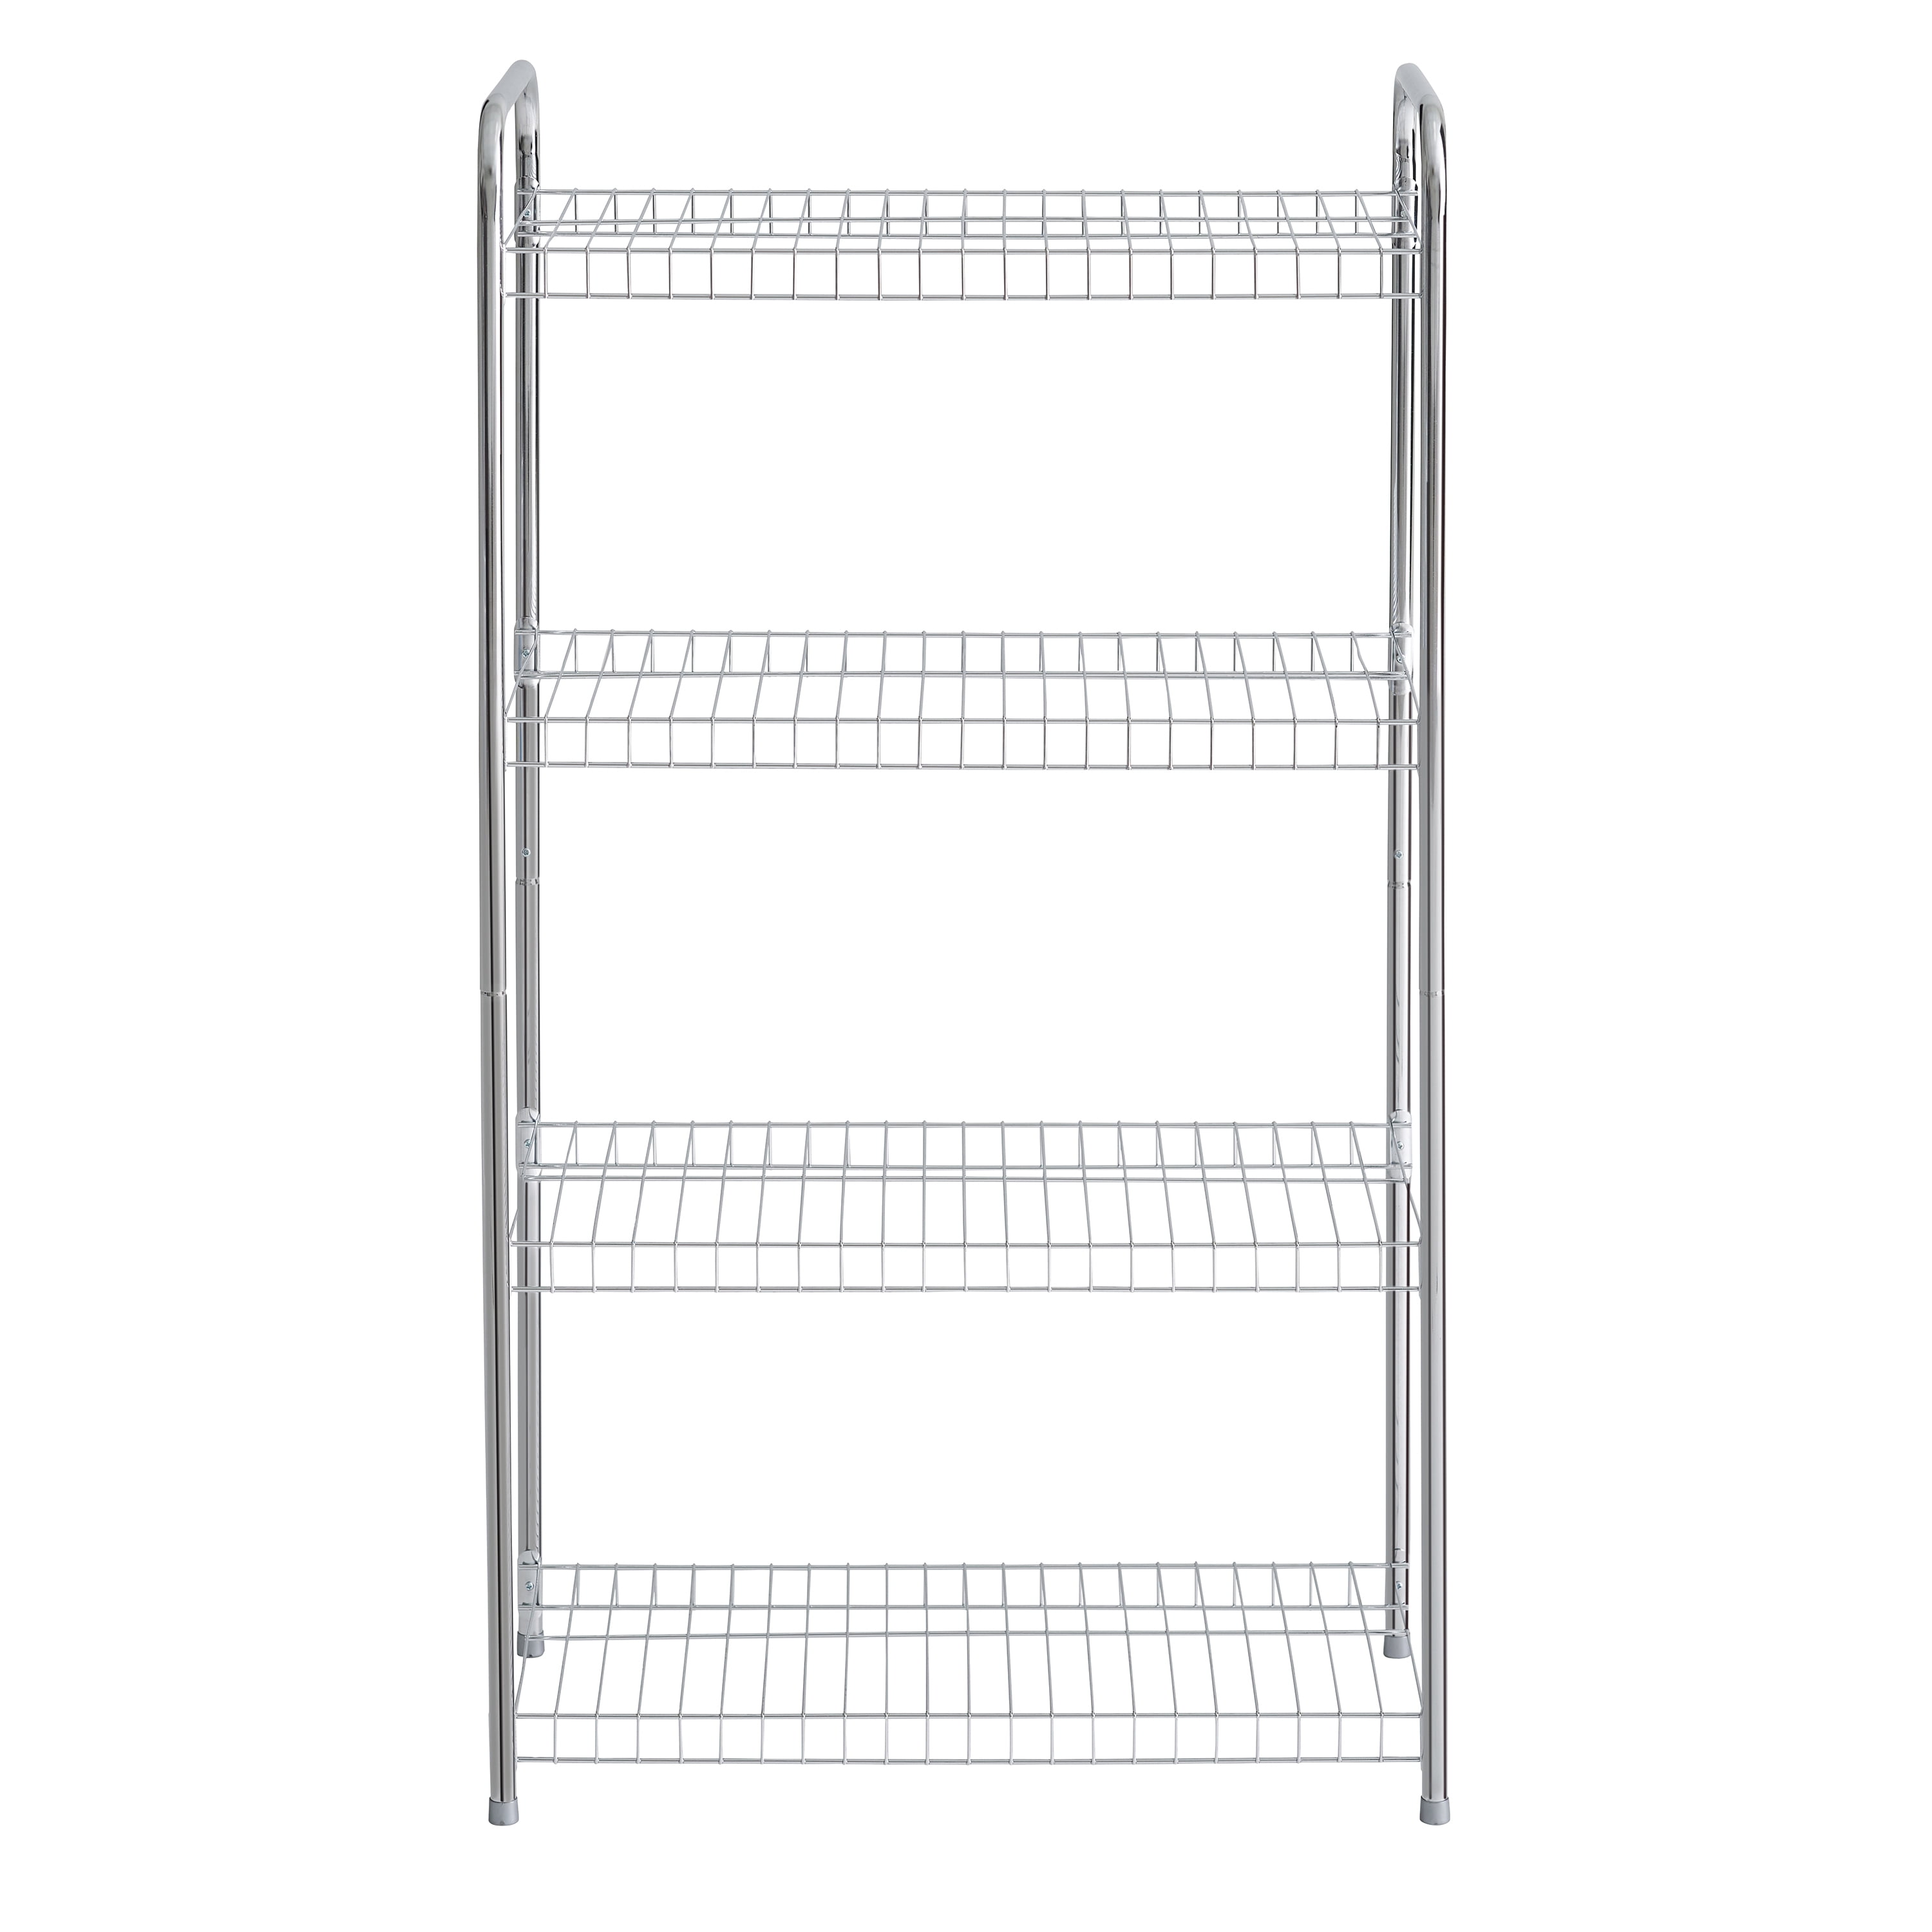 Rubbermaid 4-Tier Heavy Duty Wire Shelf, Satin Nickel, Easy Assemble with  Hardware Included, for Food/Laundry/Closet Home Storage Use